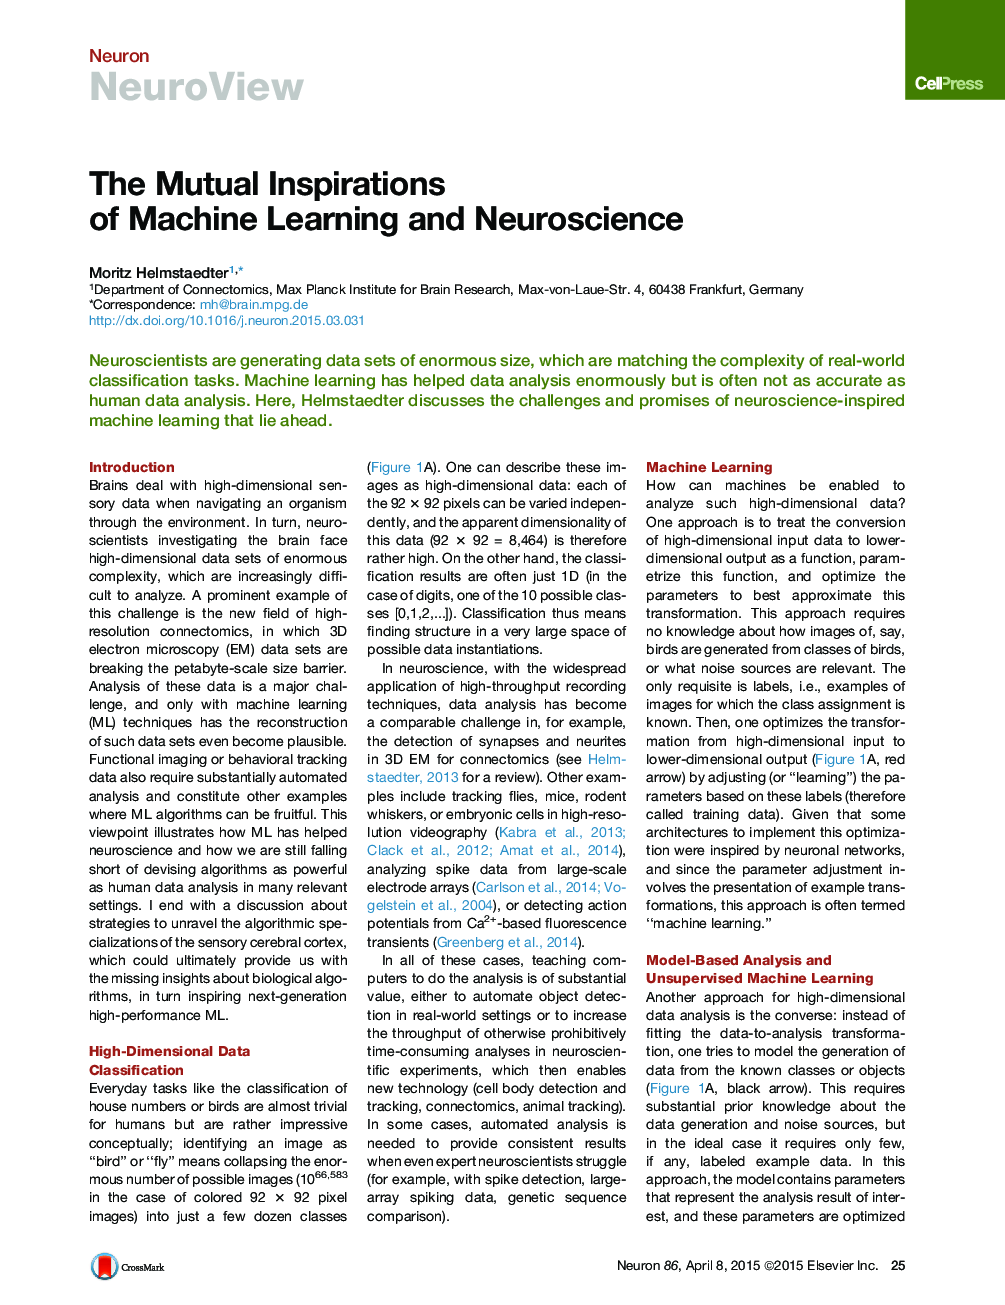 The Mutual Inspirations of Machine Learning and Neuroscience